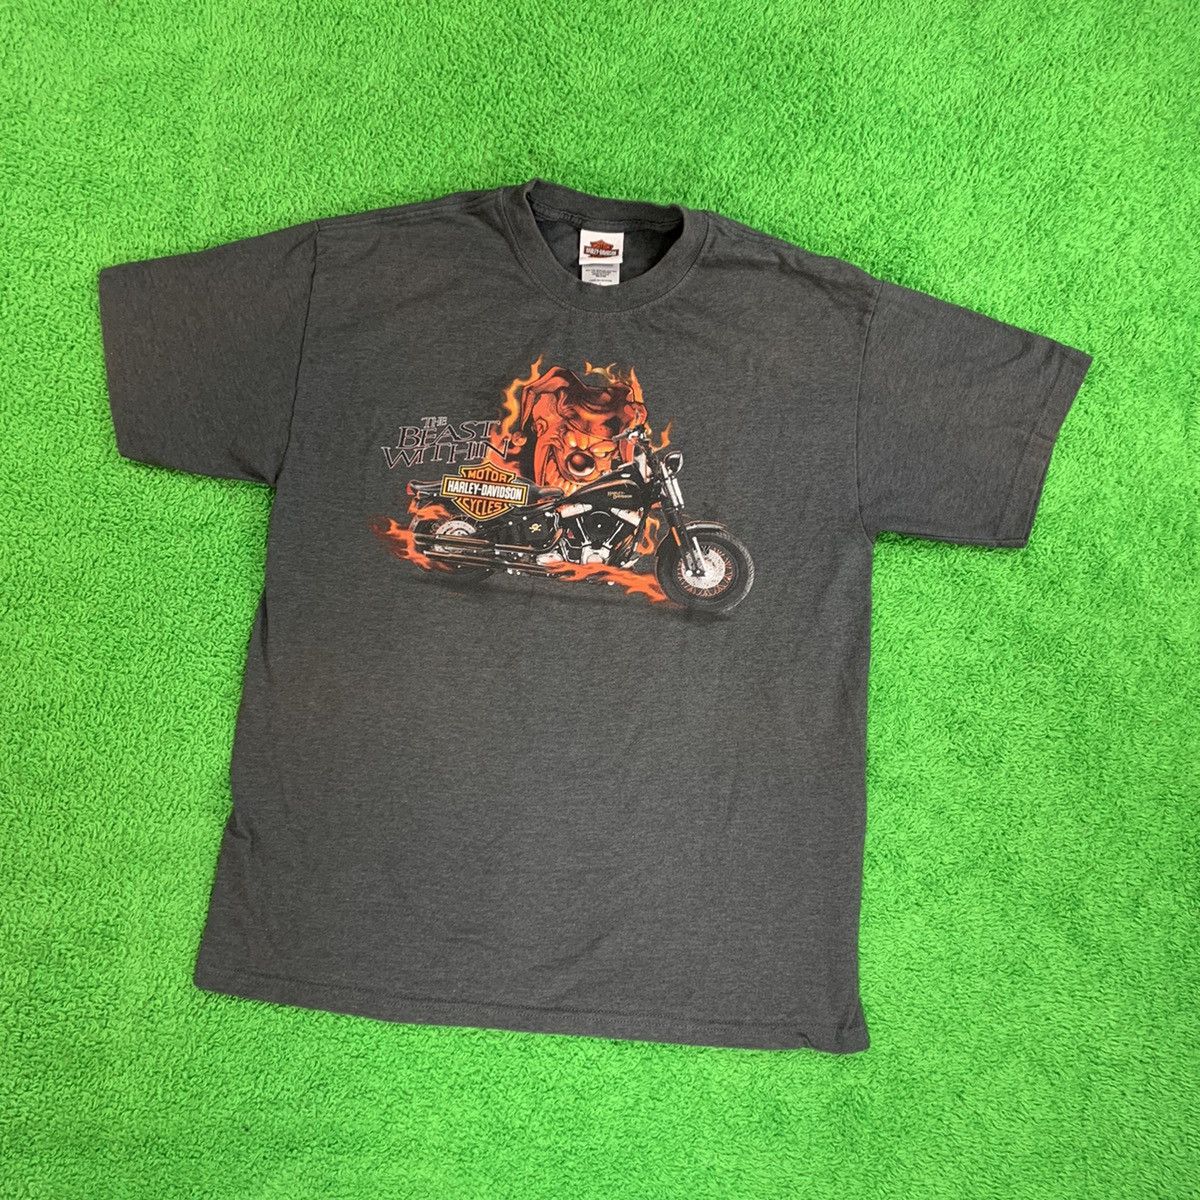 Vintage 2004 The Beast Within Harley Davidson Tshirt Size US L / EU 52-54 / 3 - 1 Preview